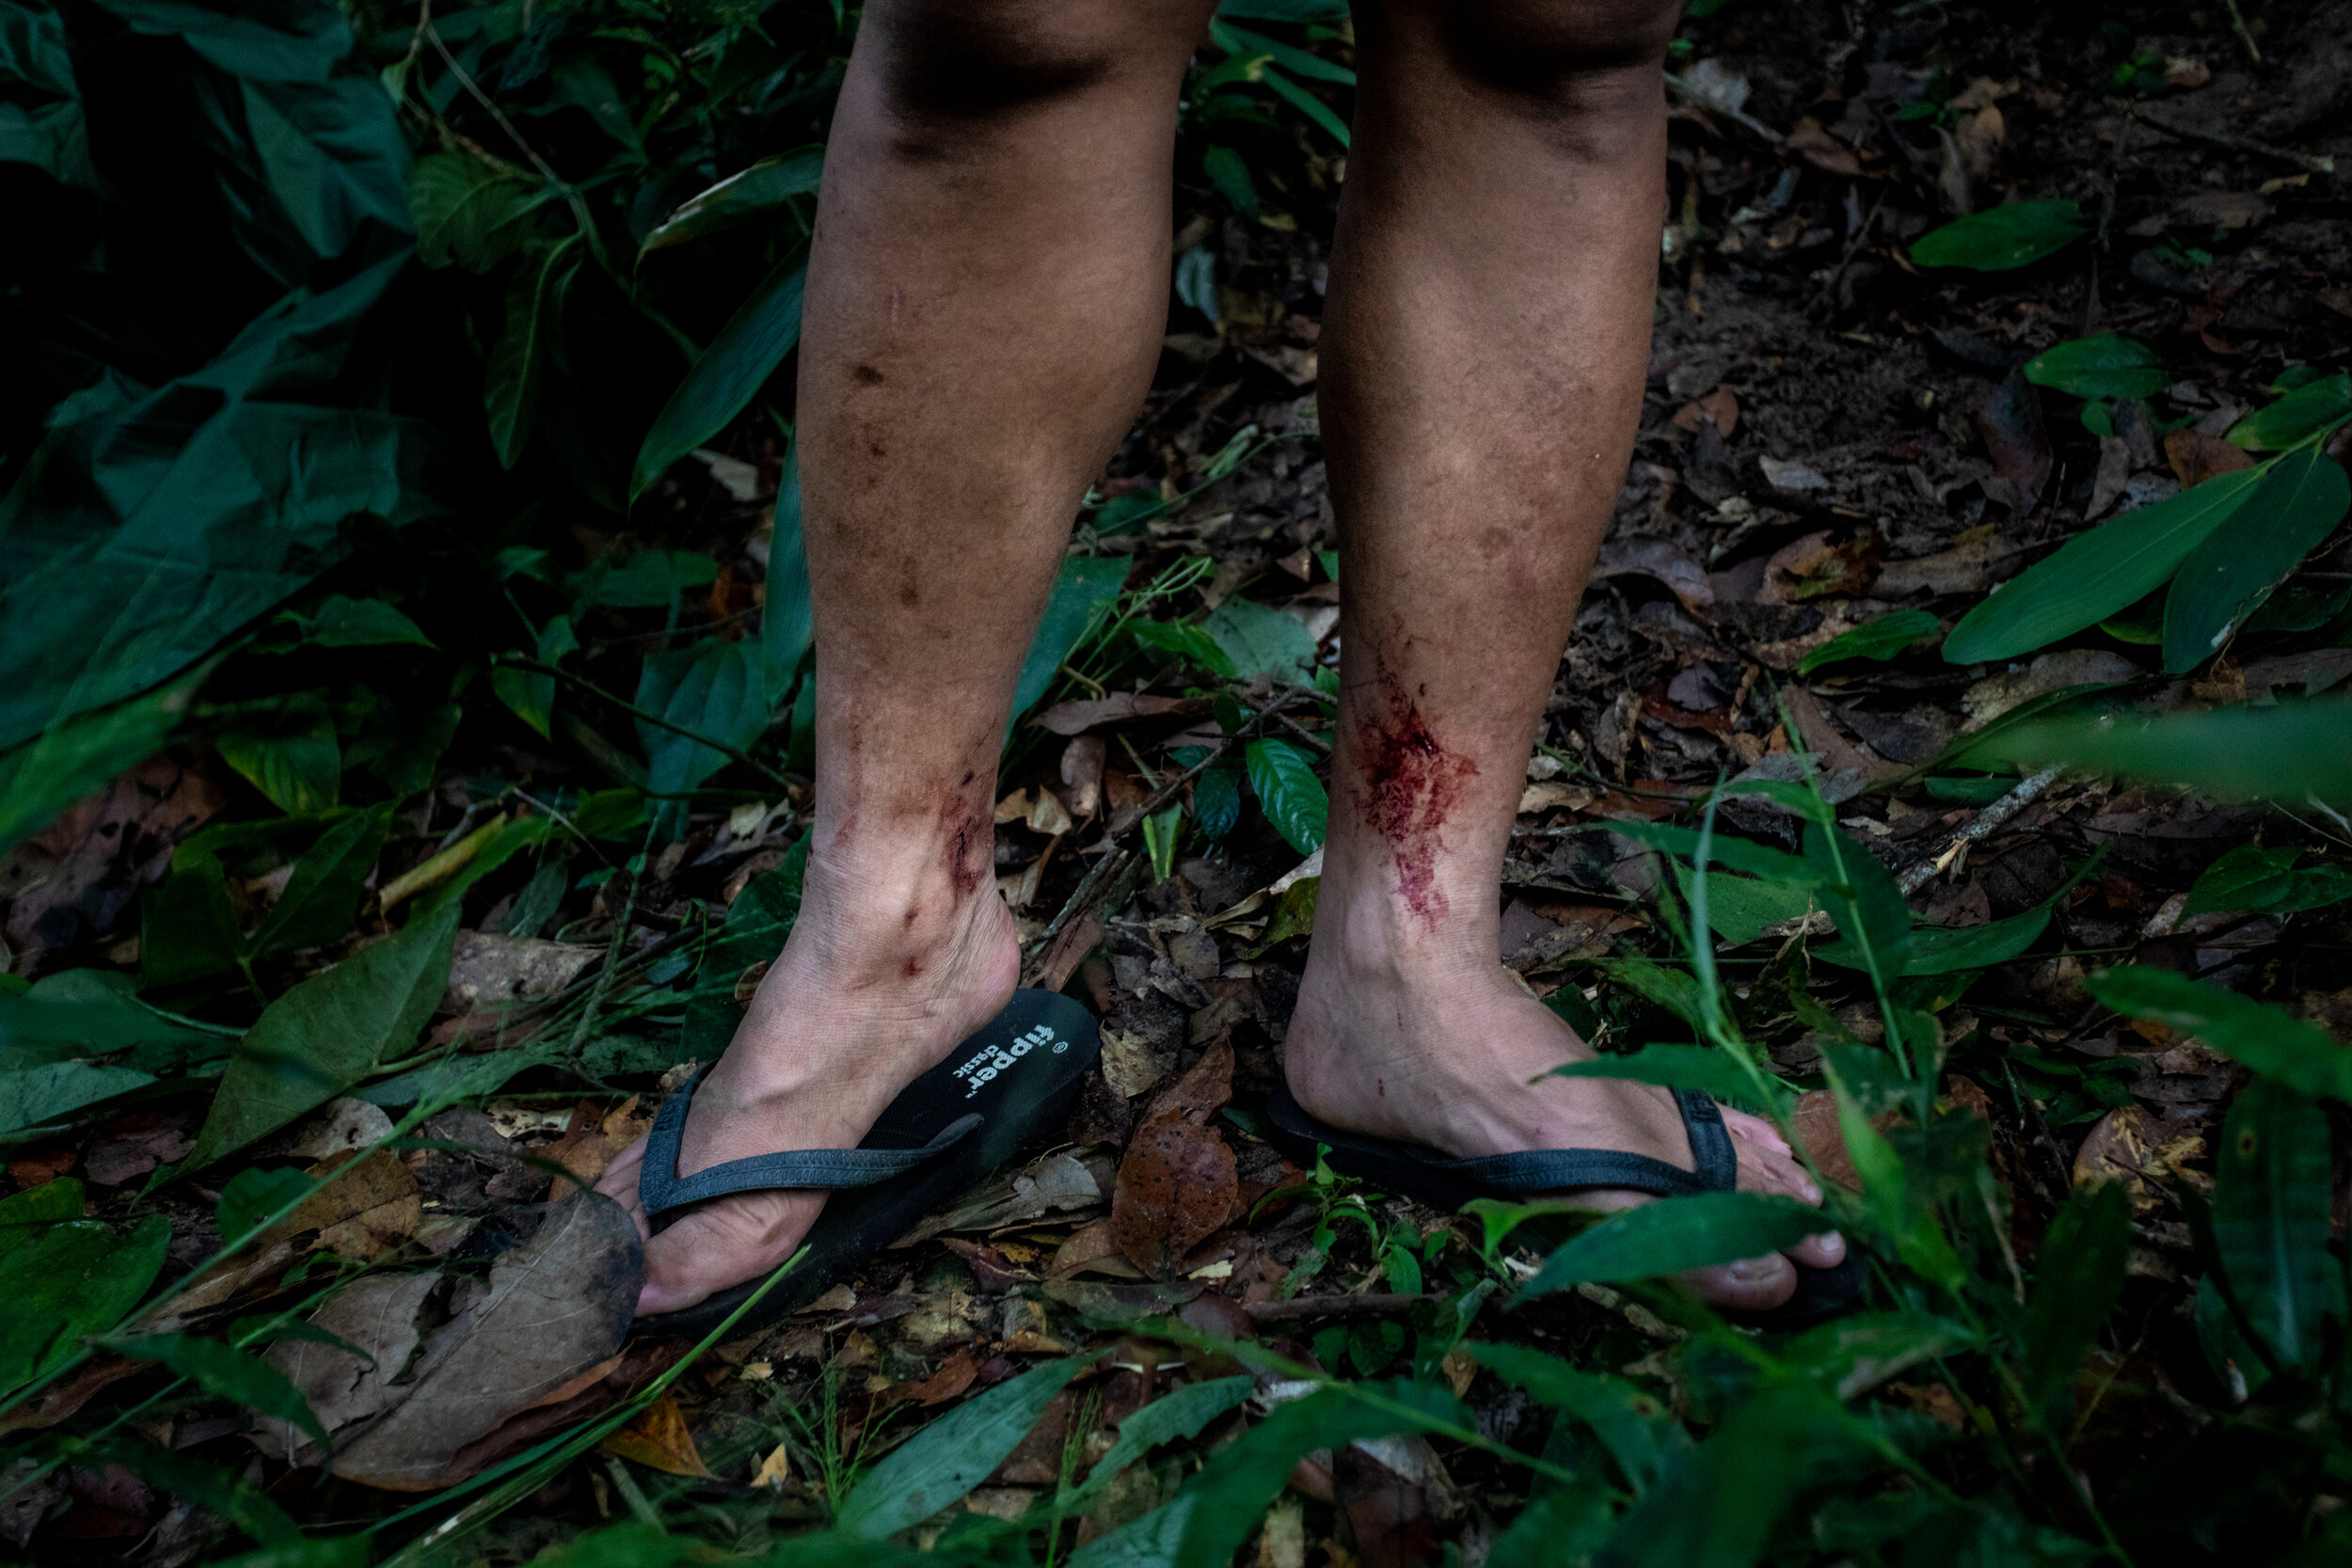  A Wildlife Alliance ranger shows off his still bleeding leech bites after a long day spent dismantling snares in the Cardamom Forest. 